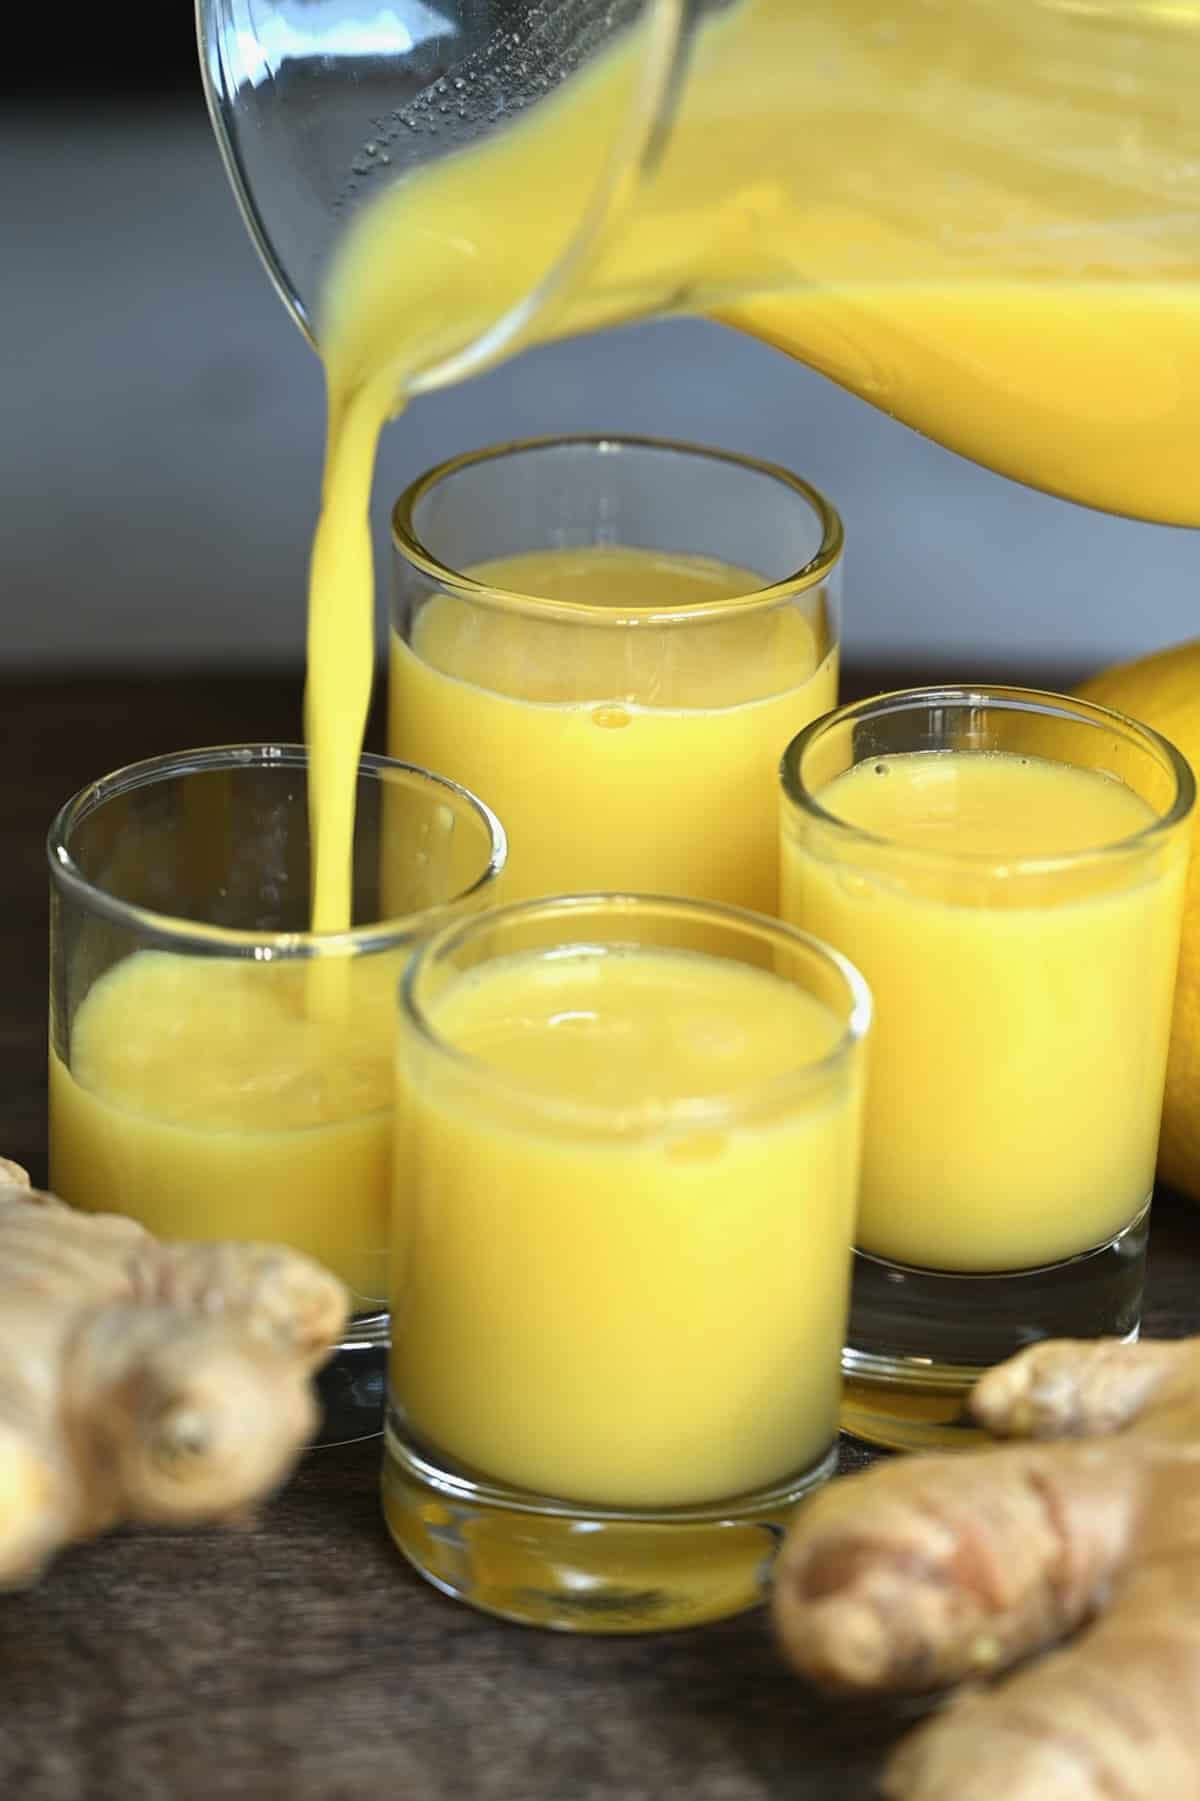 Pouring ginger shots in small glasses